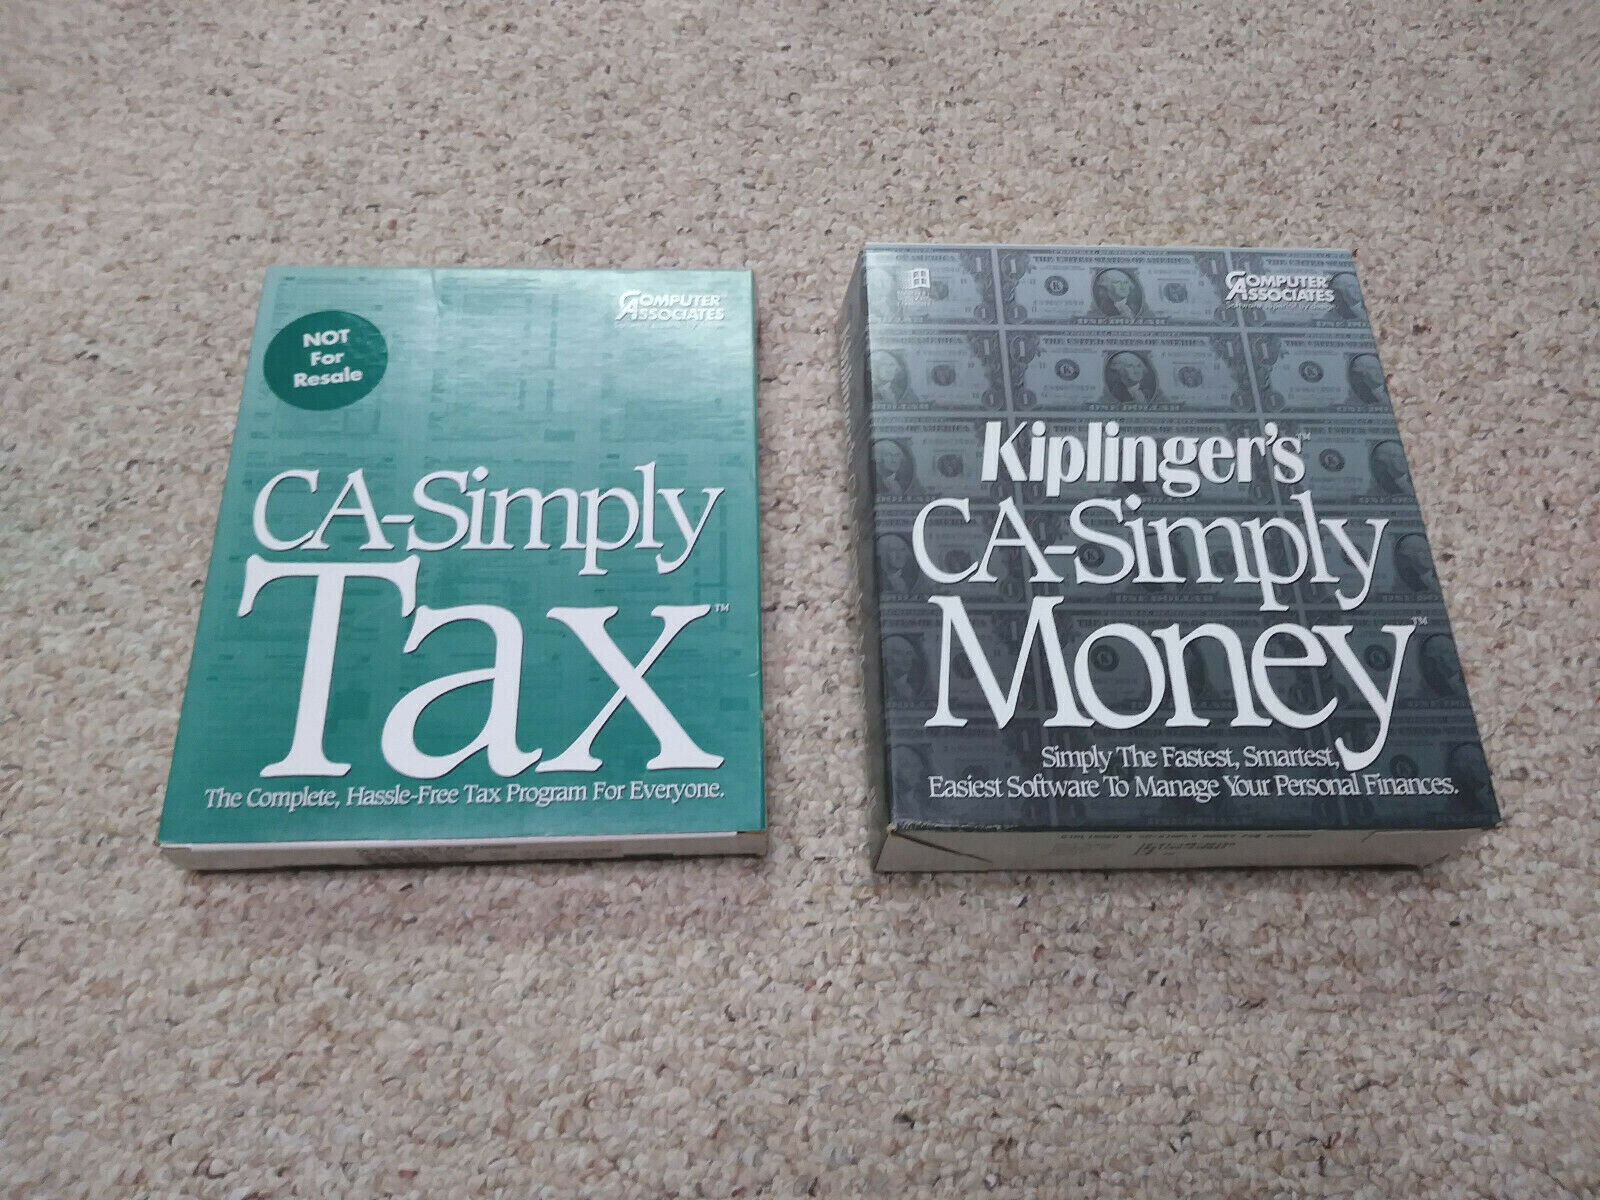 CA-Simply Money and CA-Simply Tax, Computer Associates, 1993 PC/DOS, accounting